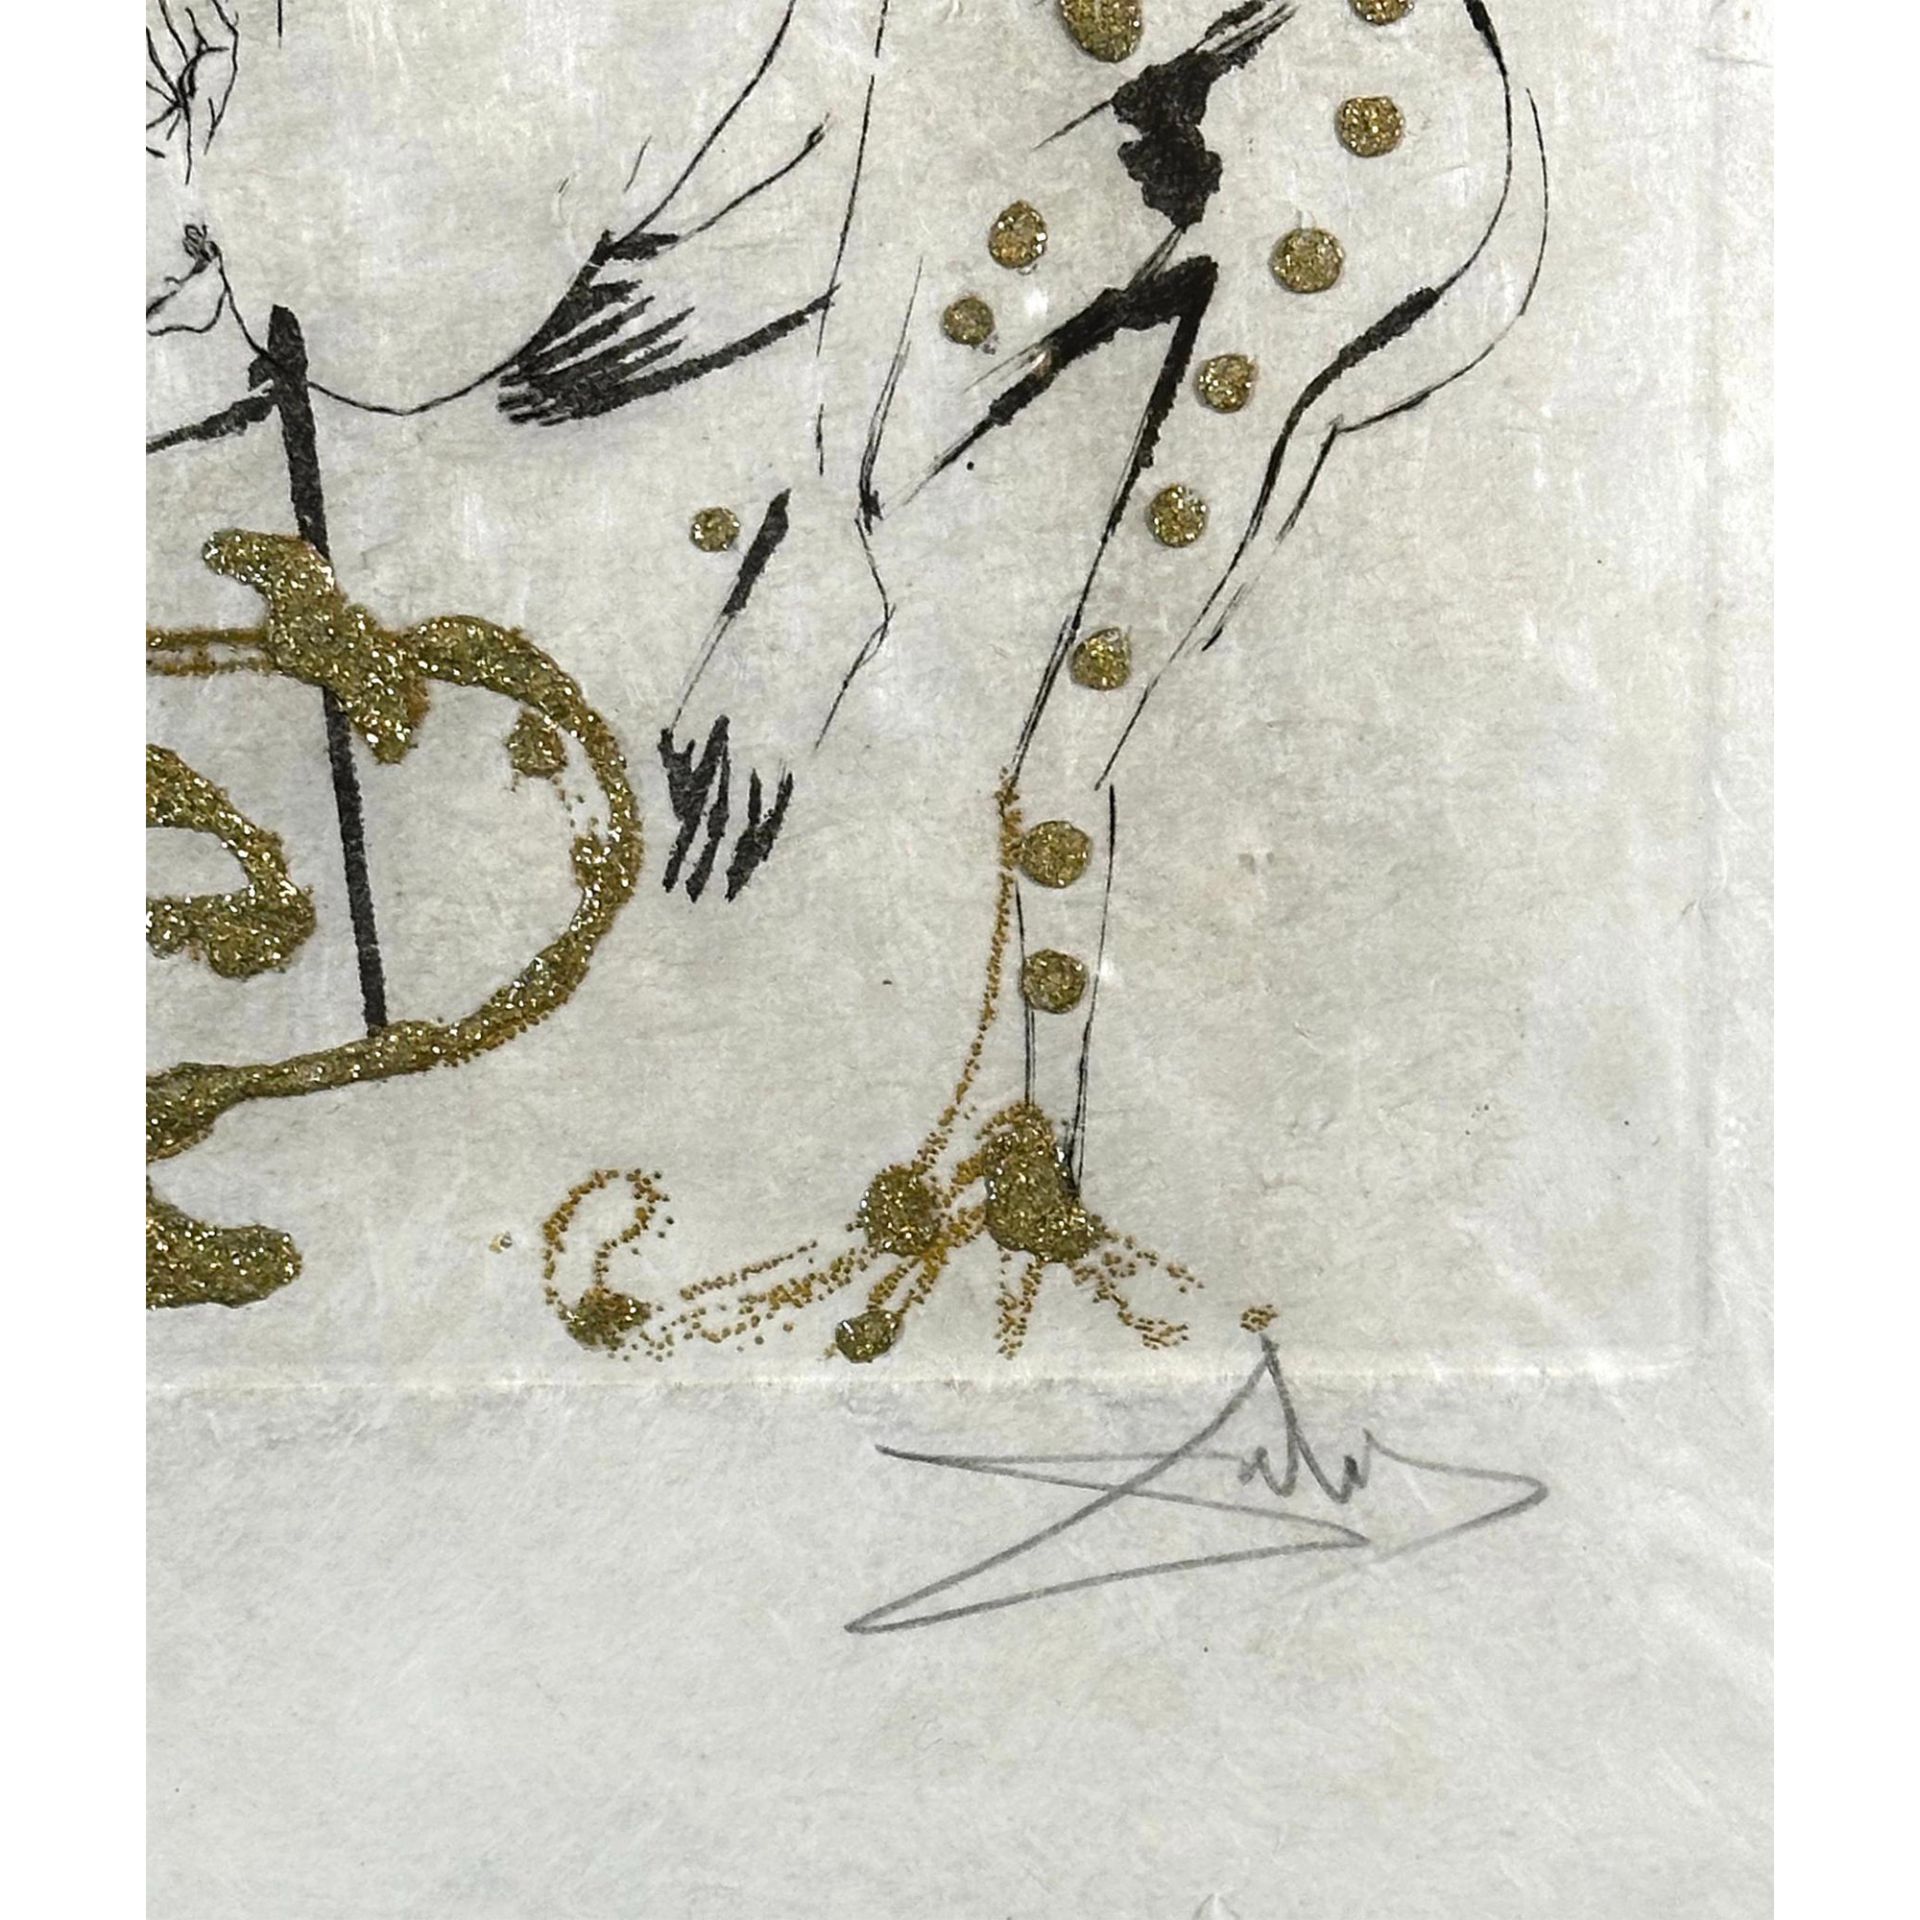 Salvador Dali (Spanish, 1904-1989) Etching plus gold flakes Les Amours Jaunes Duel with Camelias, si - Image 4 of 5